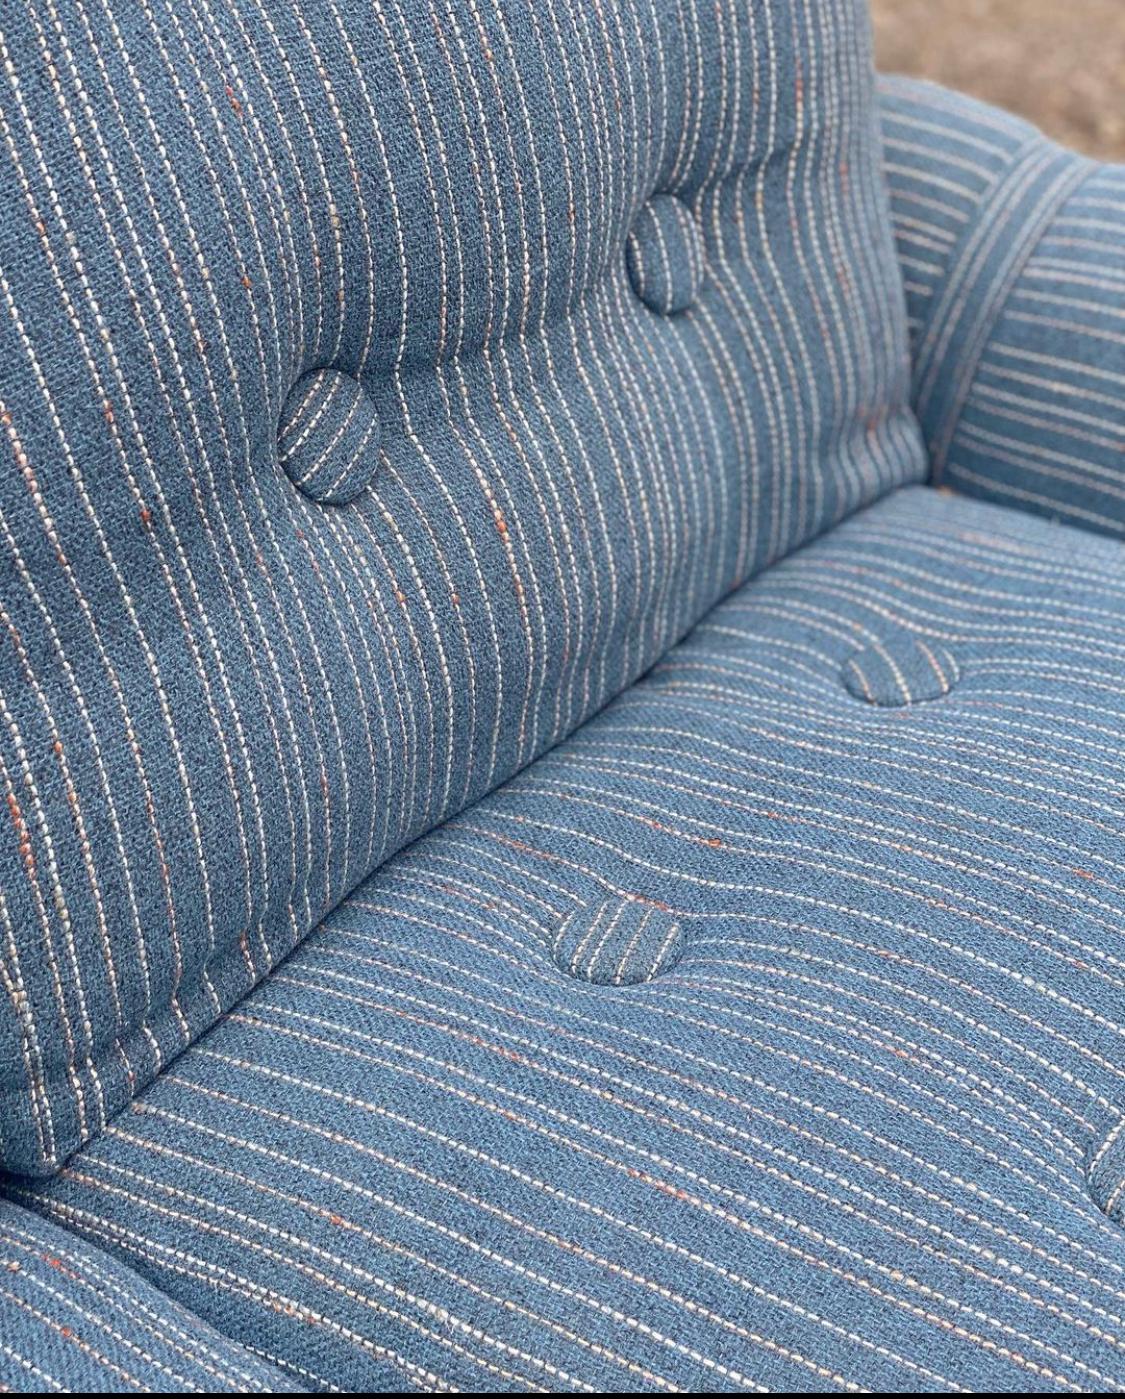 Charming MCM Teak Framed Love seat in the style of Jean Gillon for Probel -1960s

This sofa is THE love seat. 
Dressed in a blue speckled woven tweed and unique buckled arms, this piece is the perfect contemporary MCM piece for vintage lovers.